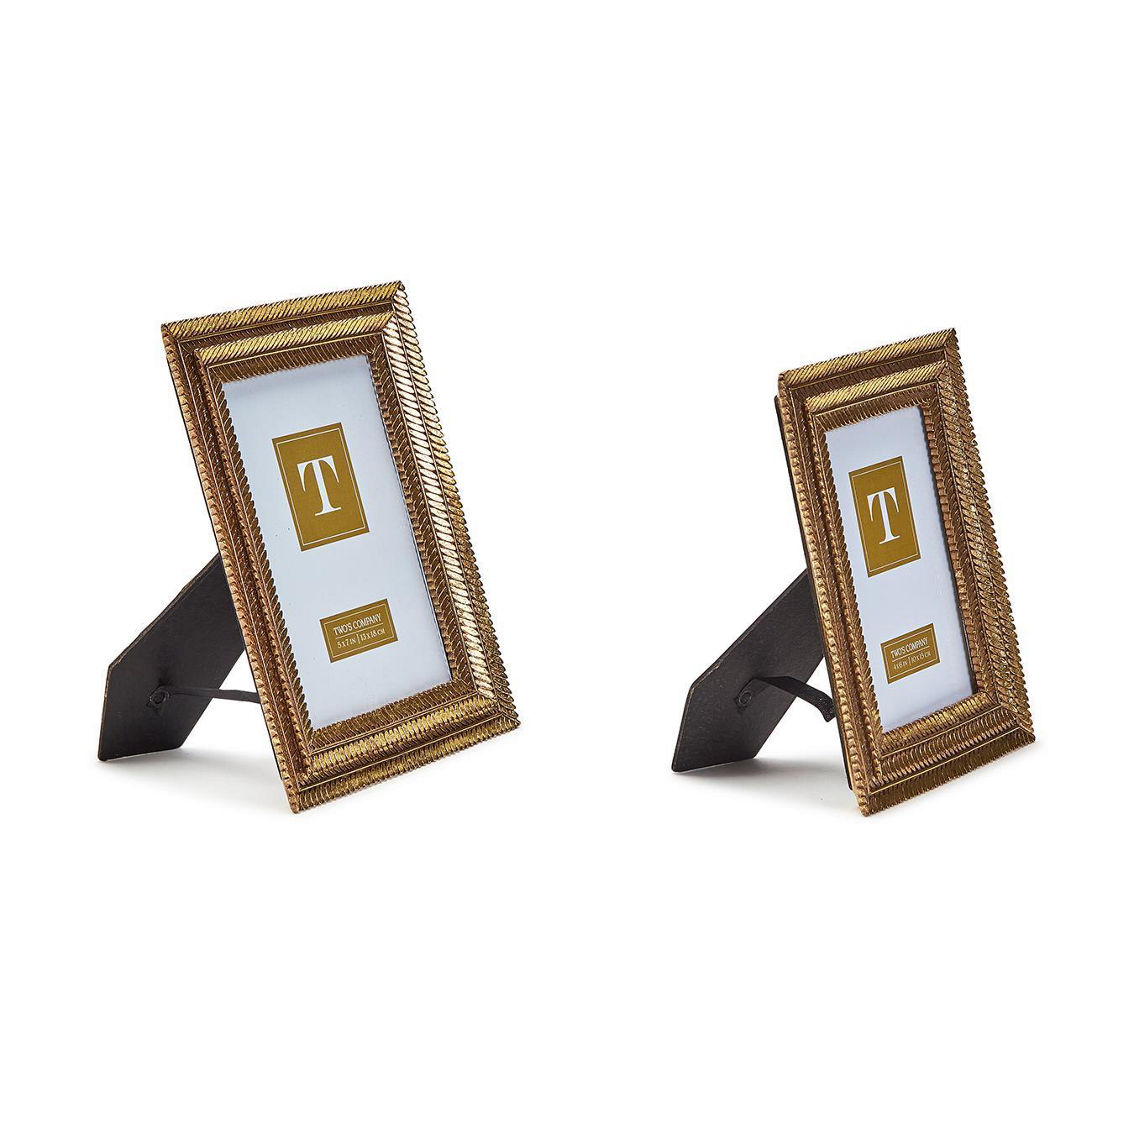 Two's Company Gold Fern S/2 Photo Frame - Image 4 of 4